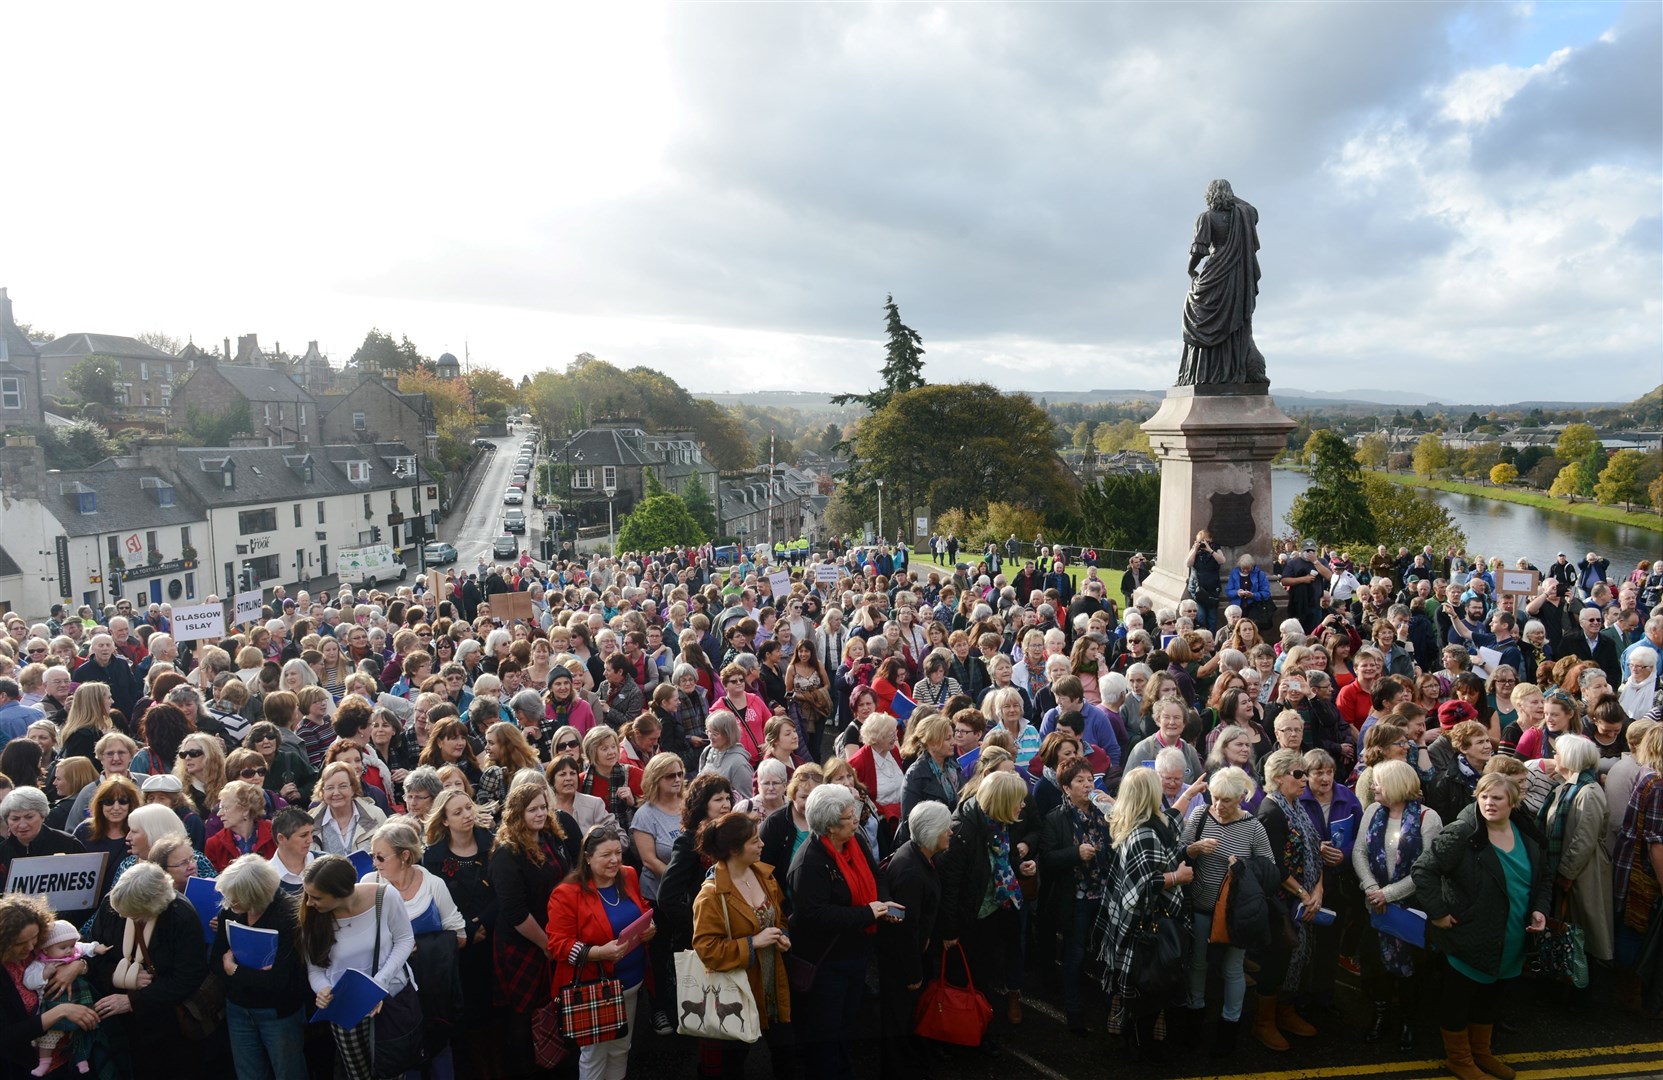 The crowds in front of Inverness Castle. The massed choirs of the Royal National Mod 2014 provided a wonderful finale to the renowned Gaelic music event. Picture: Alison White. Image No.027174.